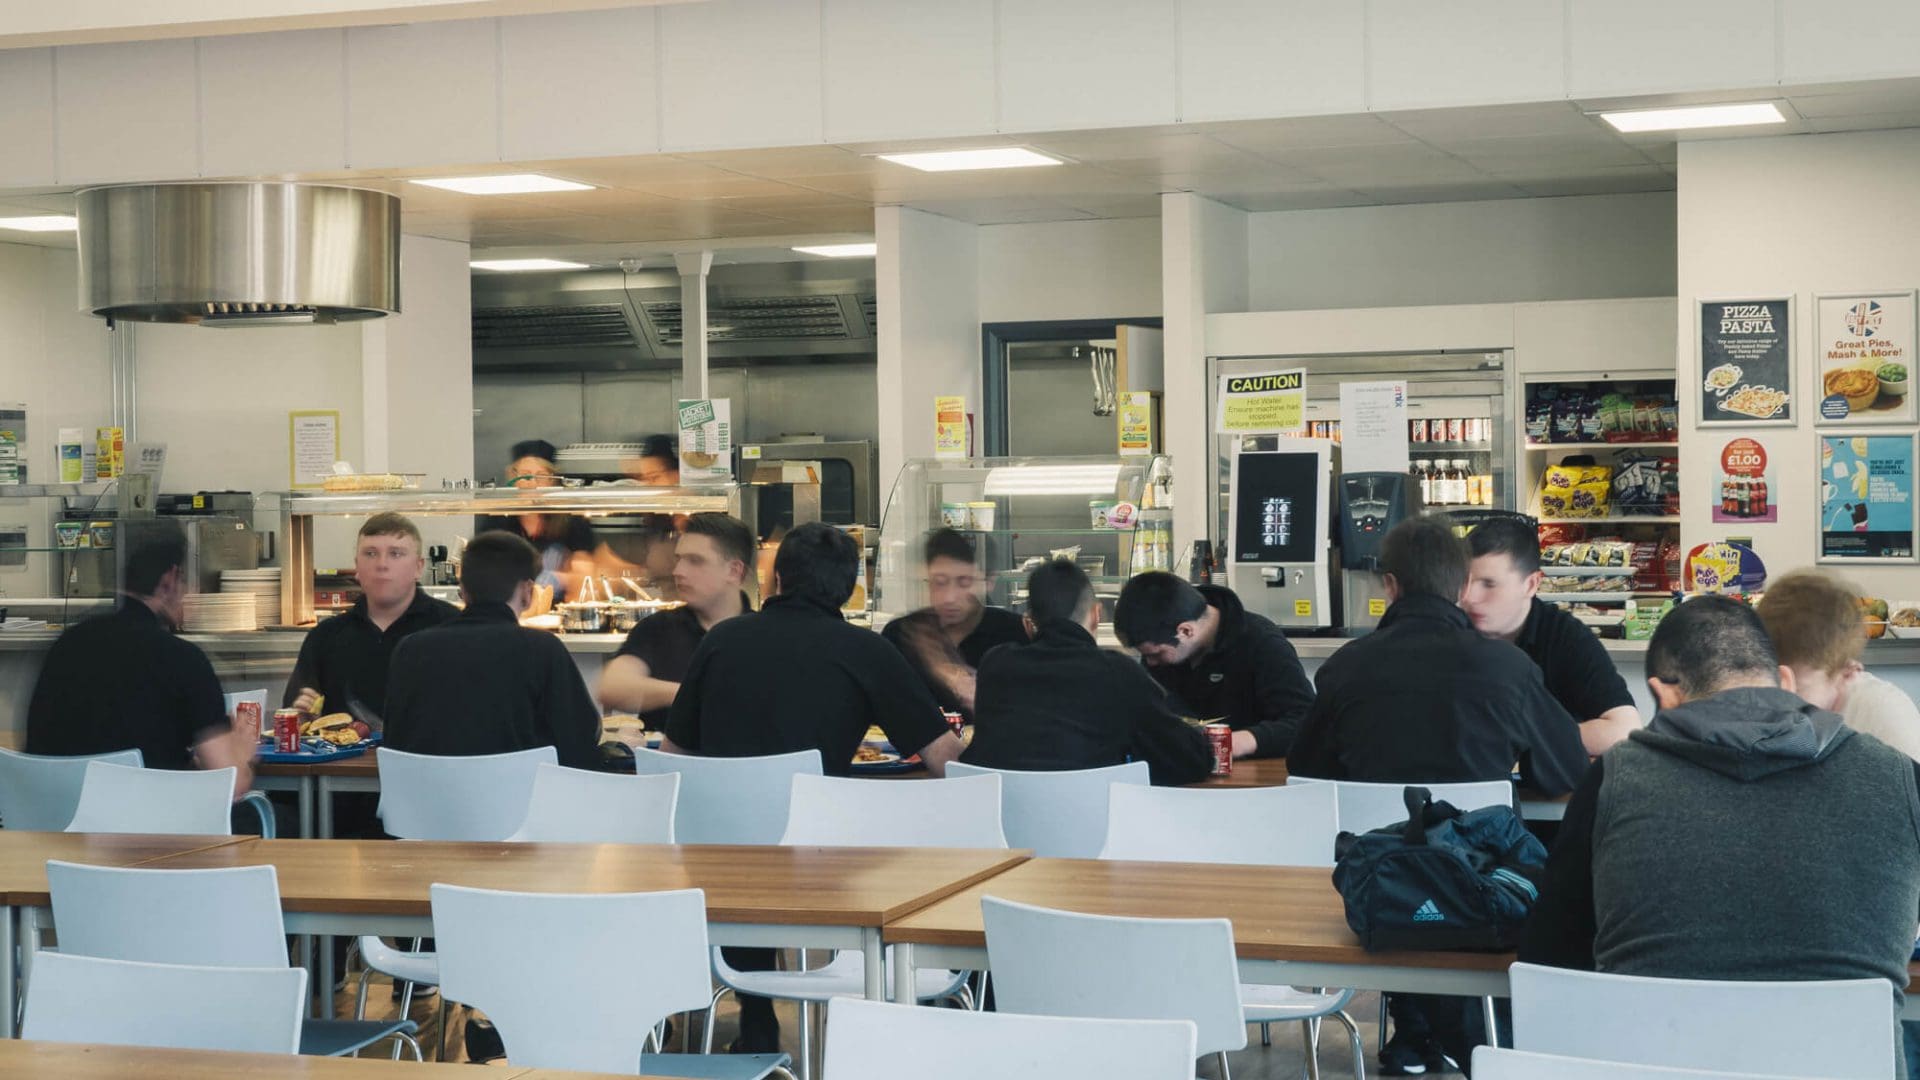 Time-lapsed and blurred image of a cafe, showing the coming and going of students